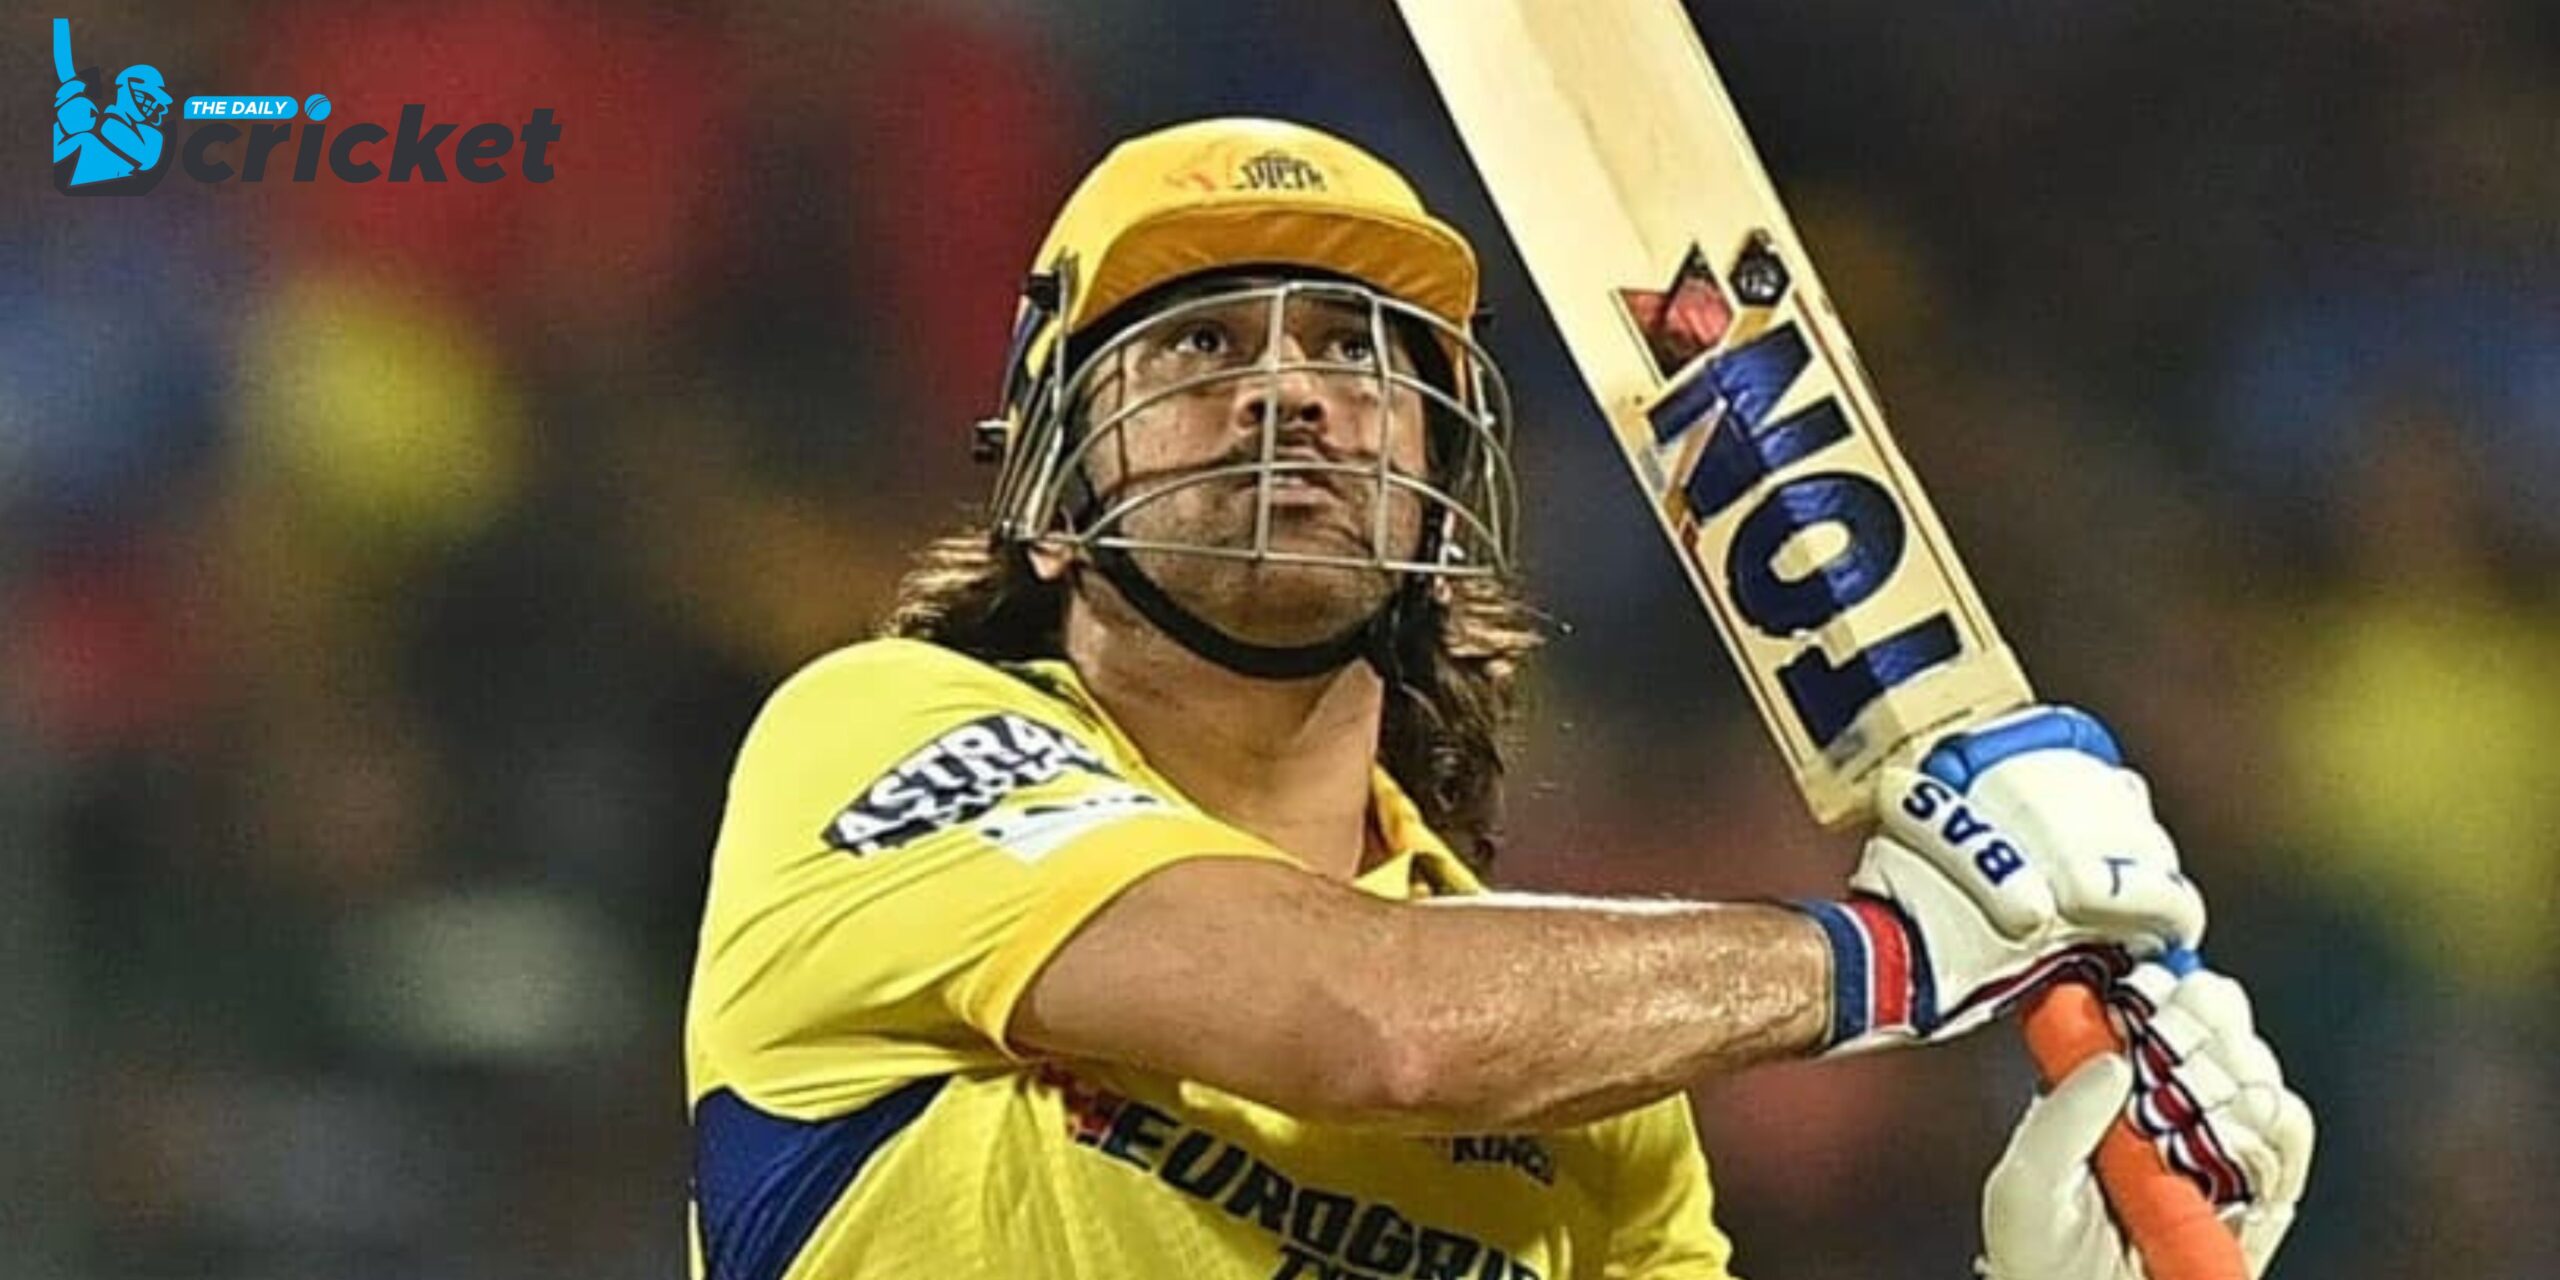 MS Dhoni insists he didn't get 'discount for age' as IPL retirement whispers are full force.